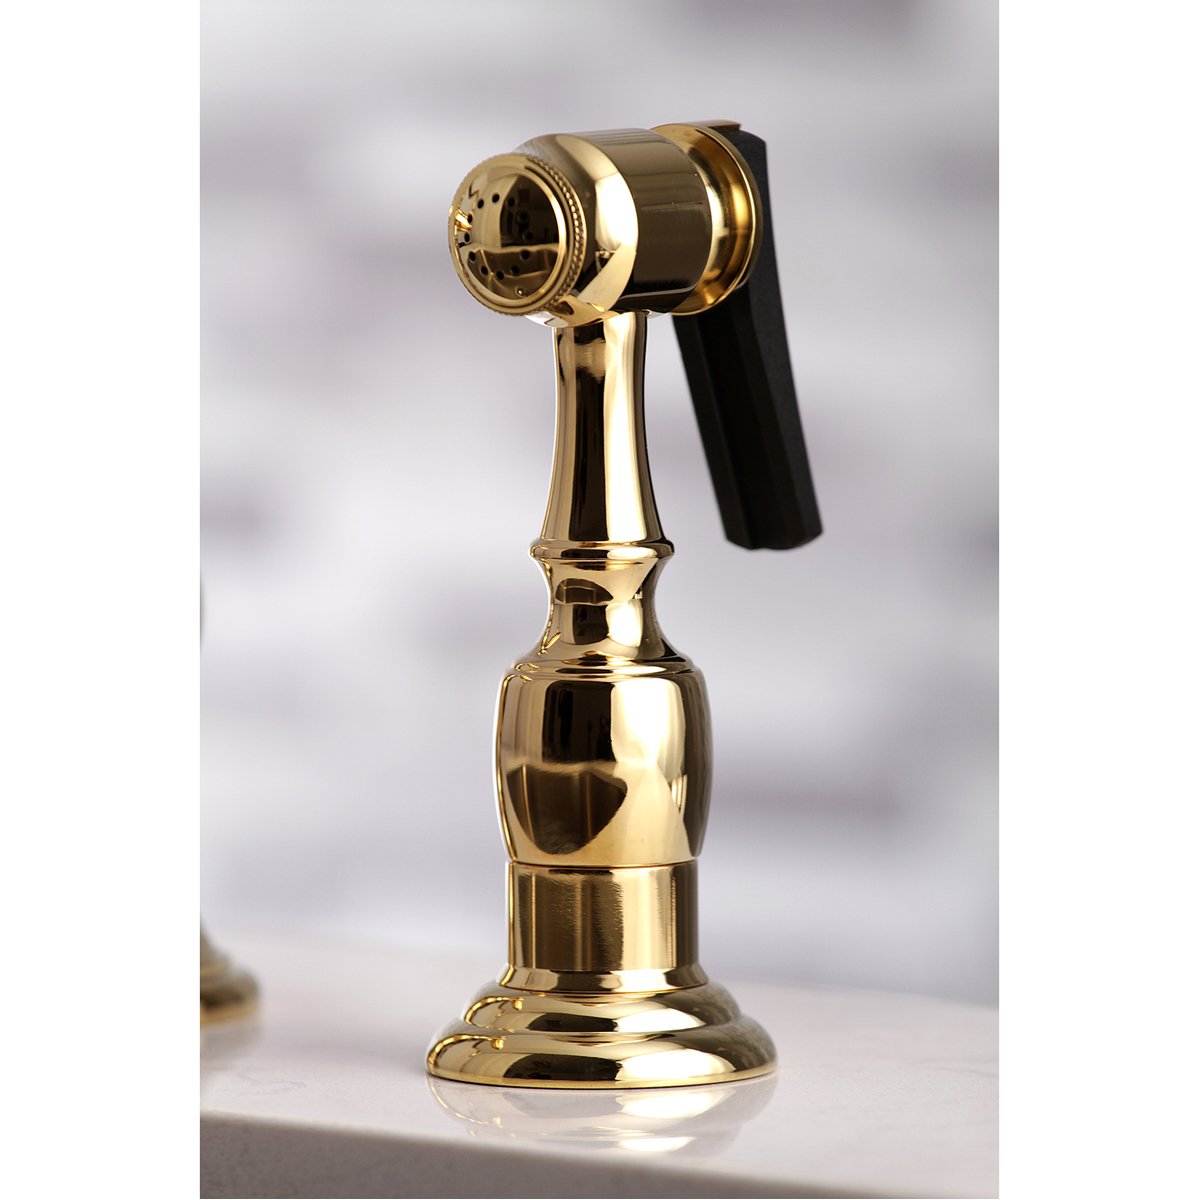 Kingston Brass English Country 8" Bridge 4-Hole Kitchen Faucet with Sprayer